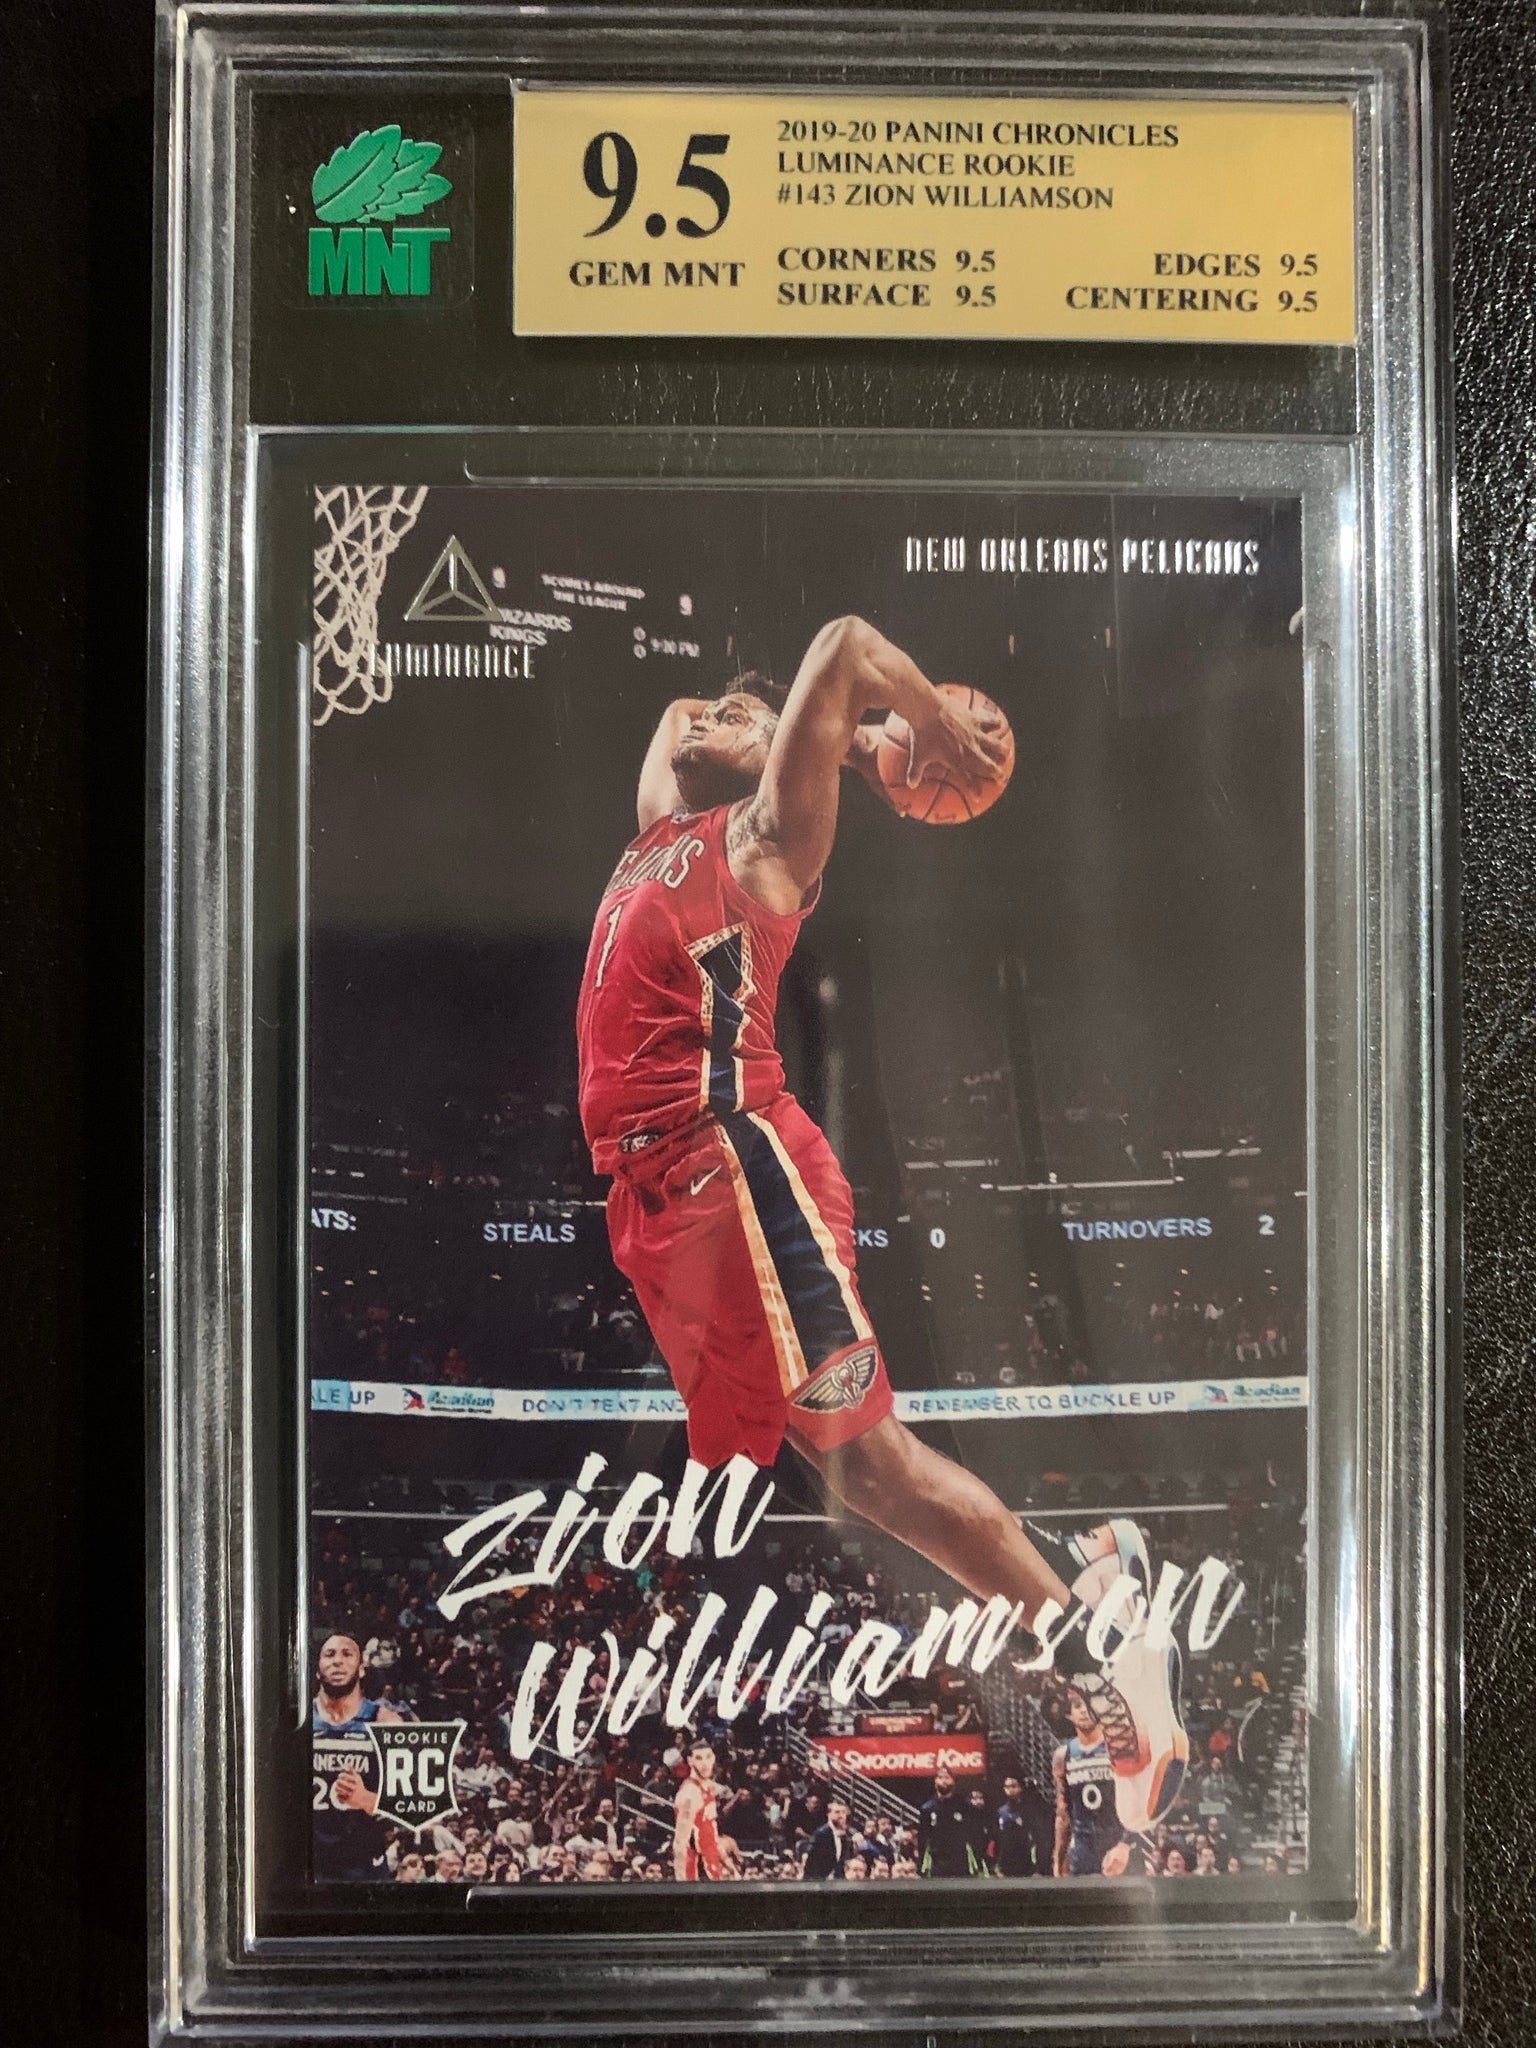 2019-2020 PANINI NBA CHRONICLES LUMINANCE #143 NEW ORLEANS PELICANS - ZION WILLIAMSON ROOKIE CARD GRADED MNT 9.5 GEM MINT